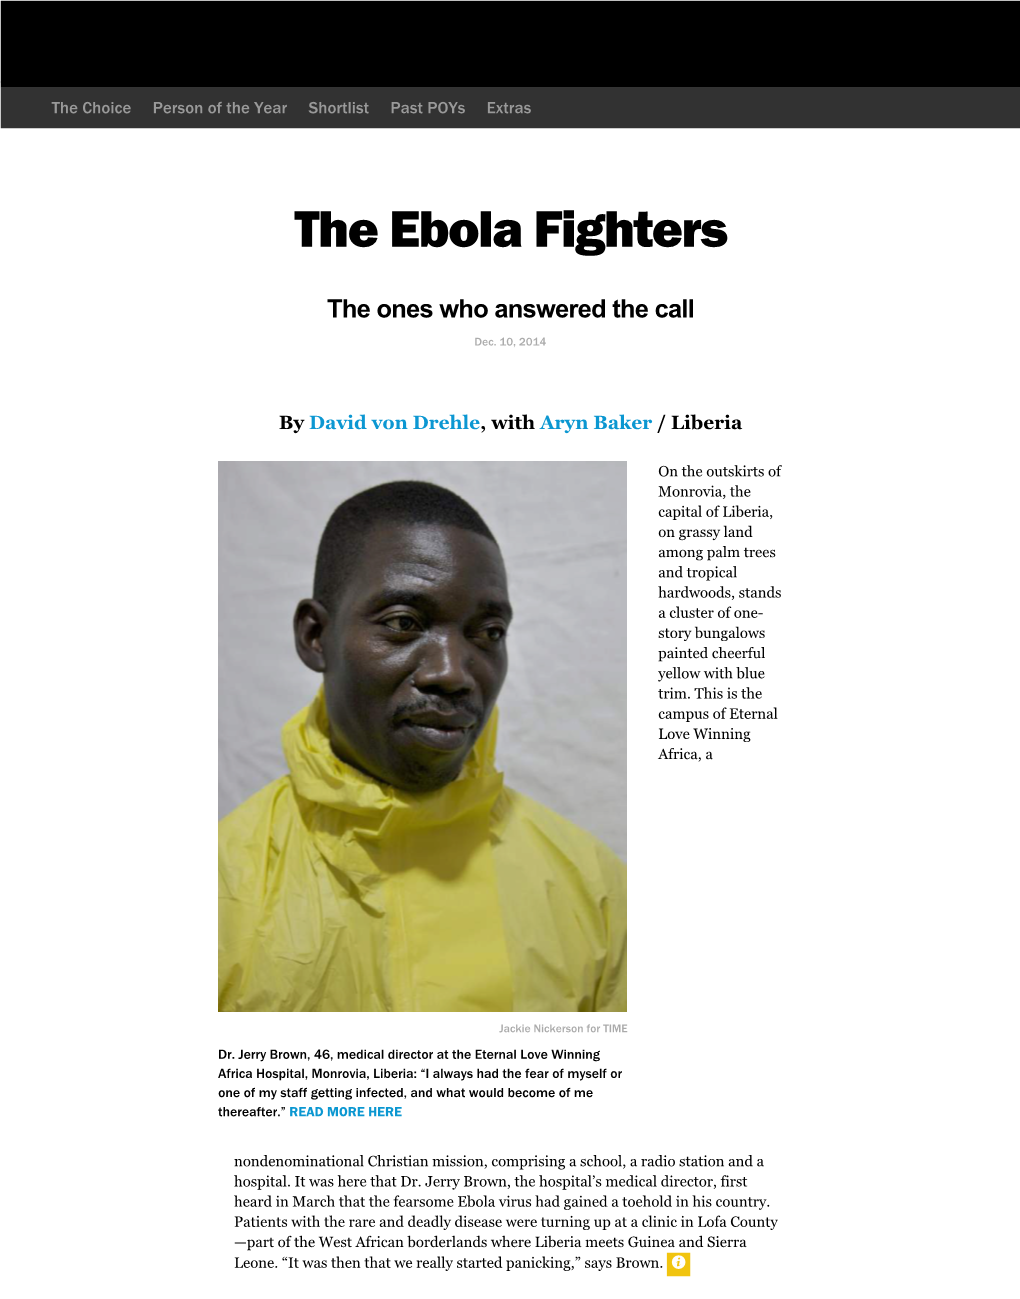 The Ebola Fighters